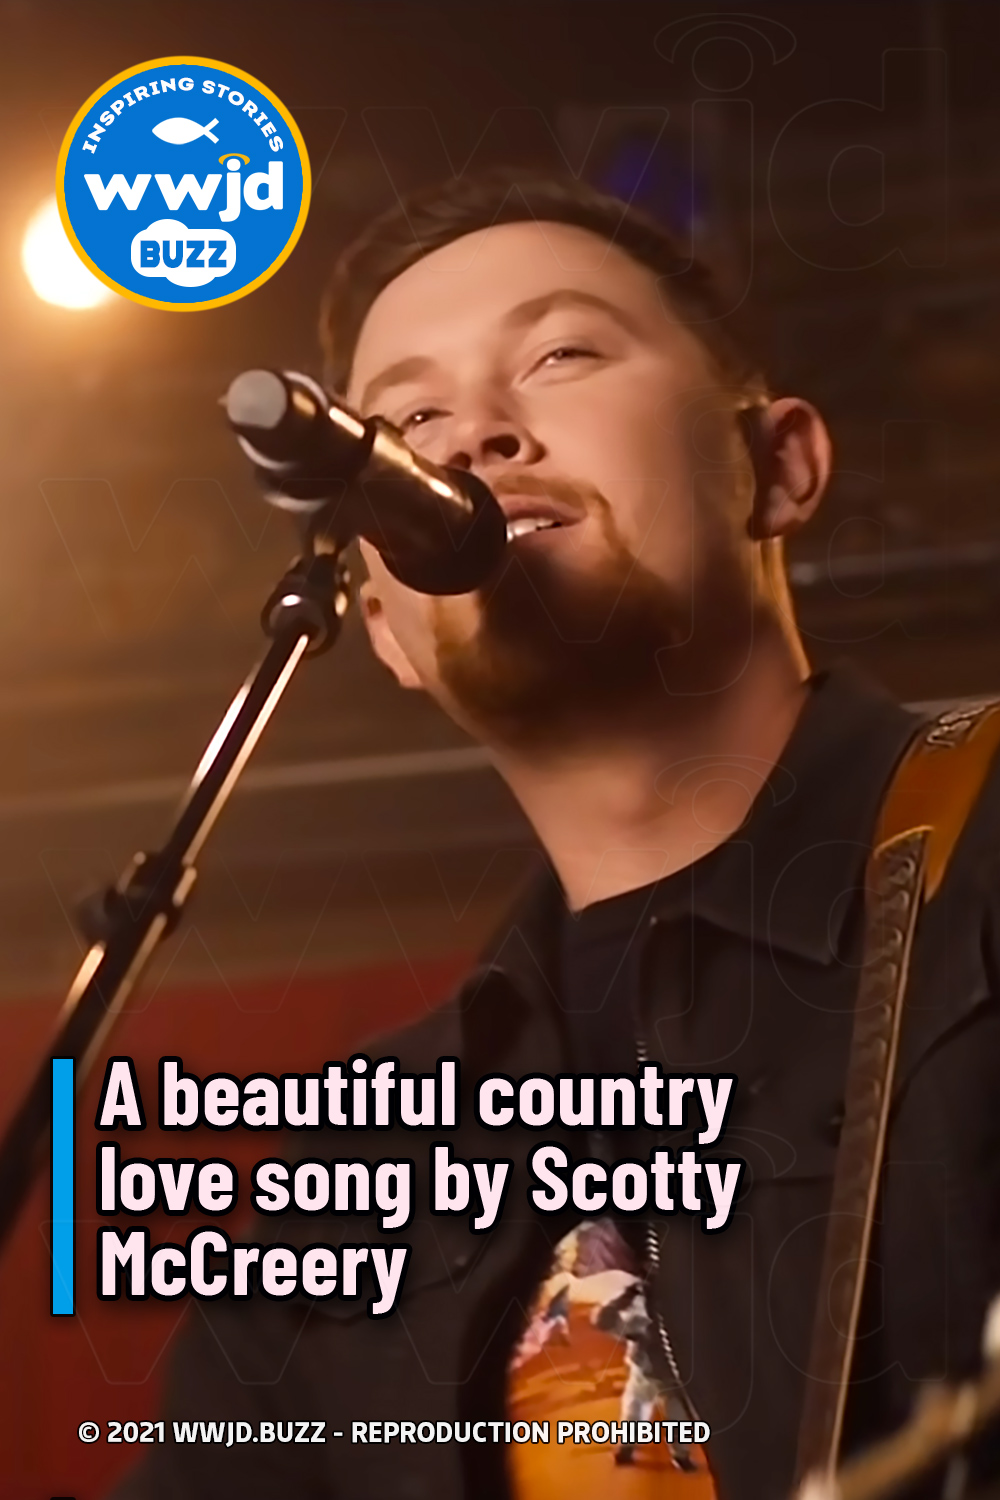 A beautiful country love song by Scotty McCreery